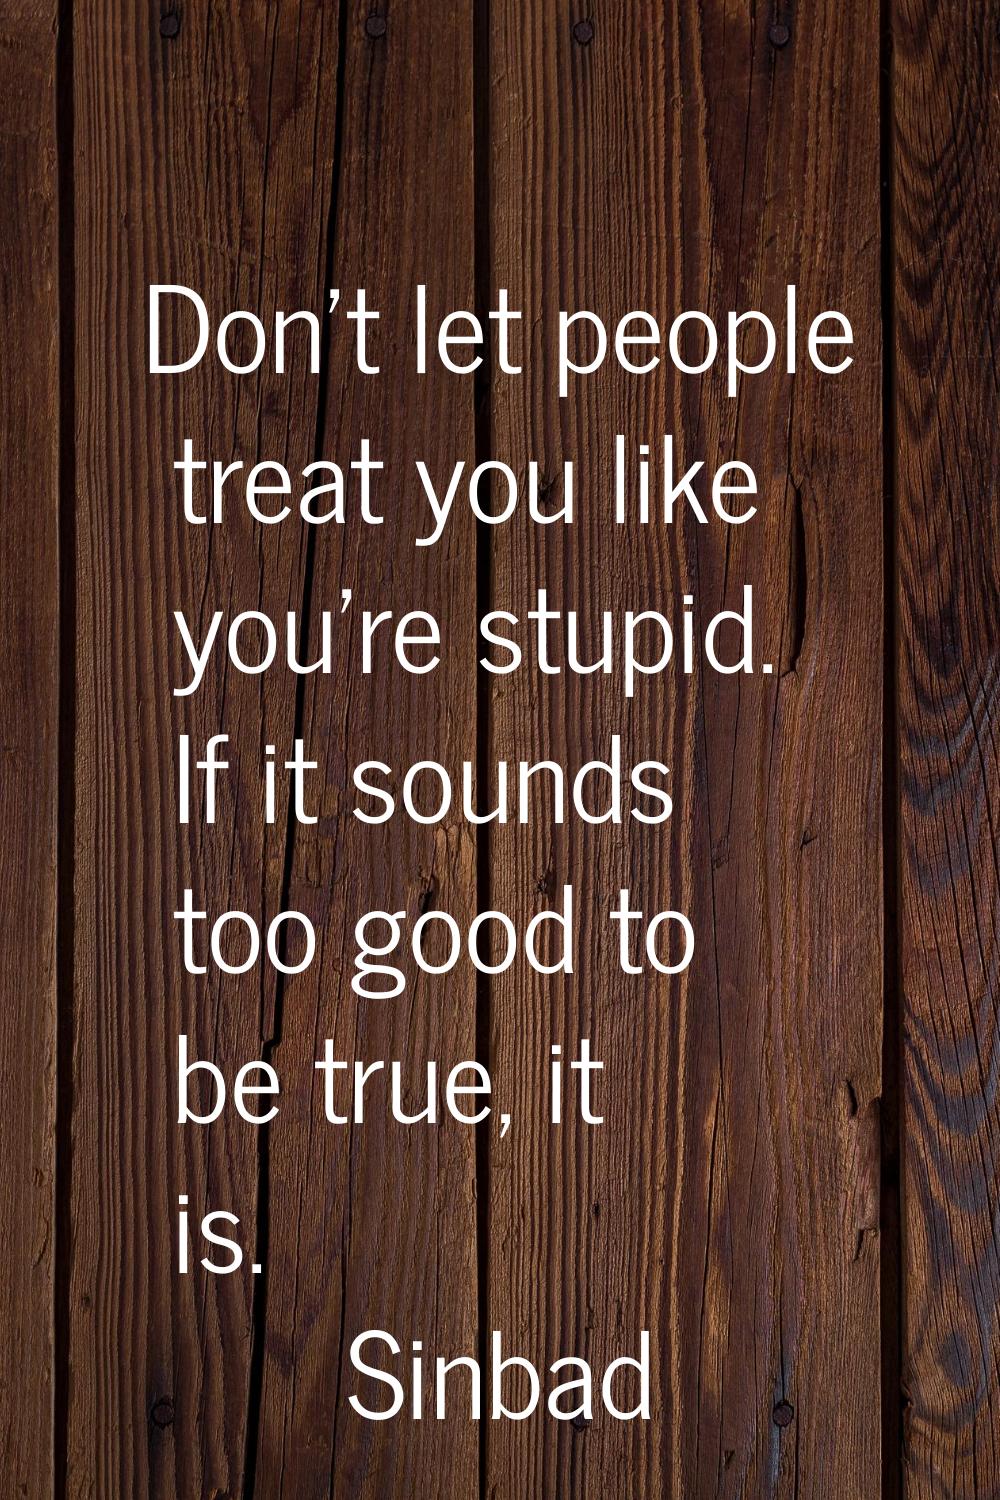 Don't let people treat you like you're stupid. If it sounds too good to be true, it is.